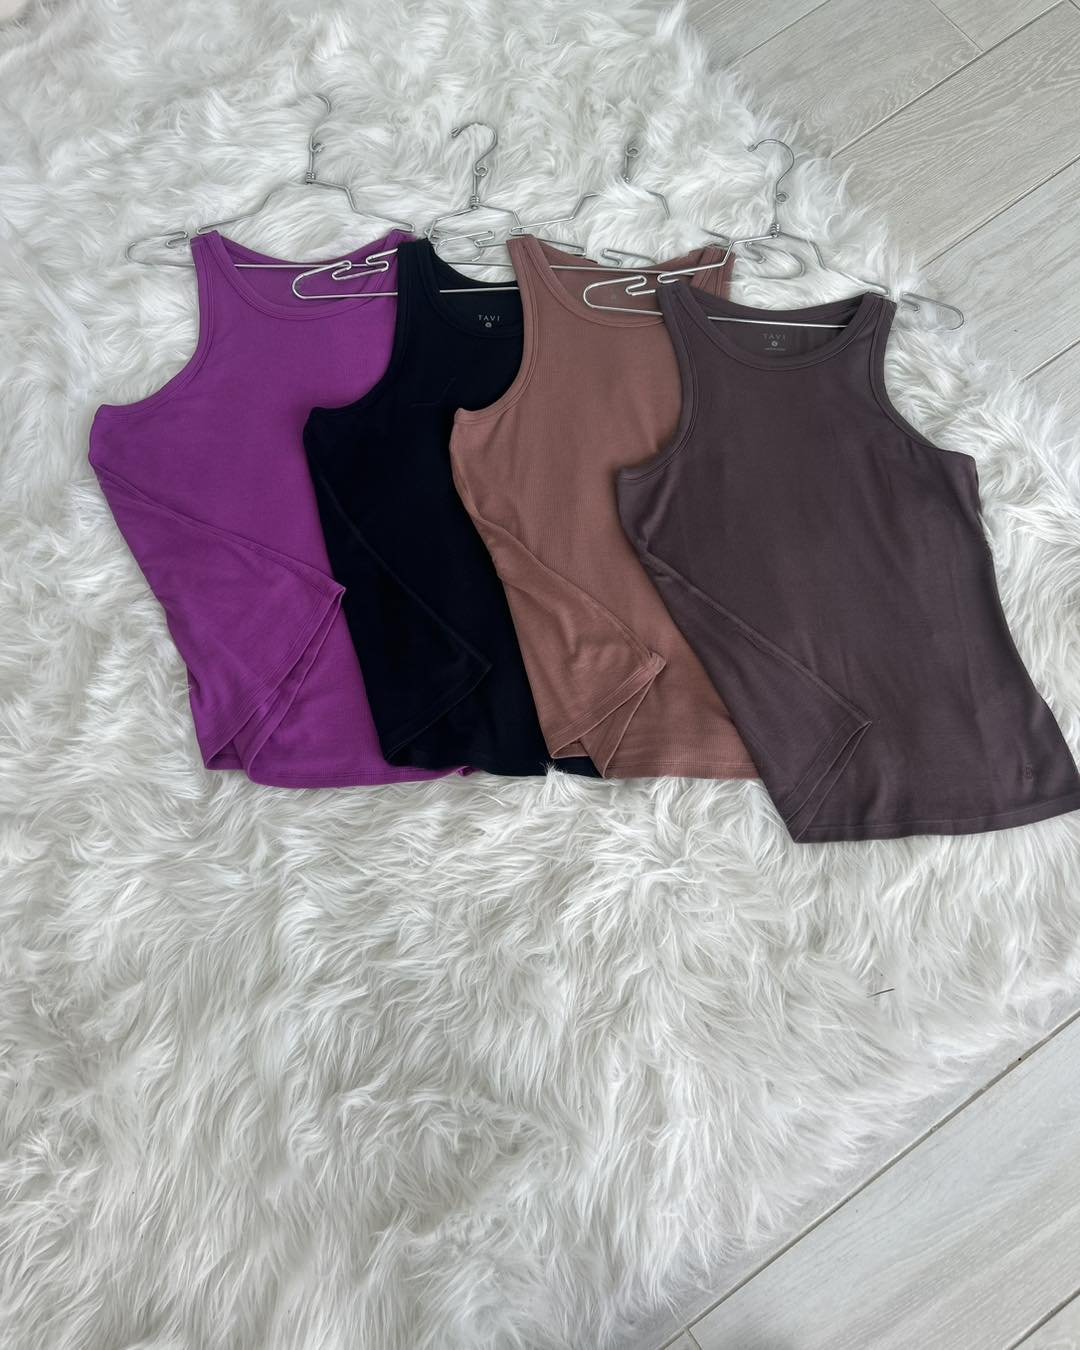 Introducing the ultimate summer staple: Our Perfect Fit Rib Tank!
Say hello to comfort and style all rolled into one! Our rib tank is designed to lightly hug your curves in all the right places, giving you that perfect fit every time.  Whether you&rs